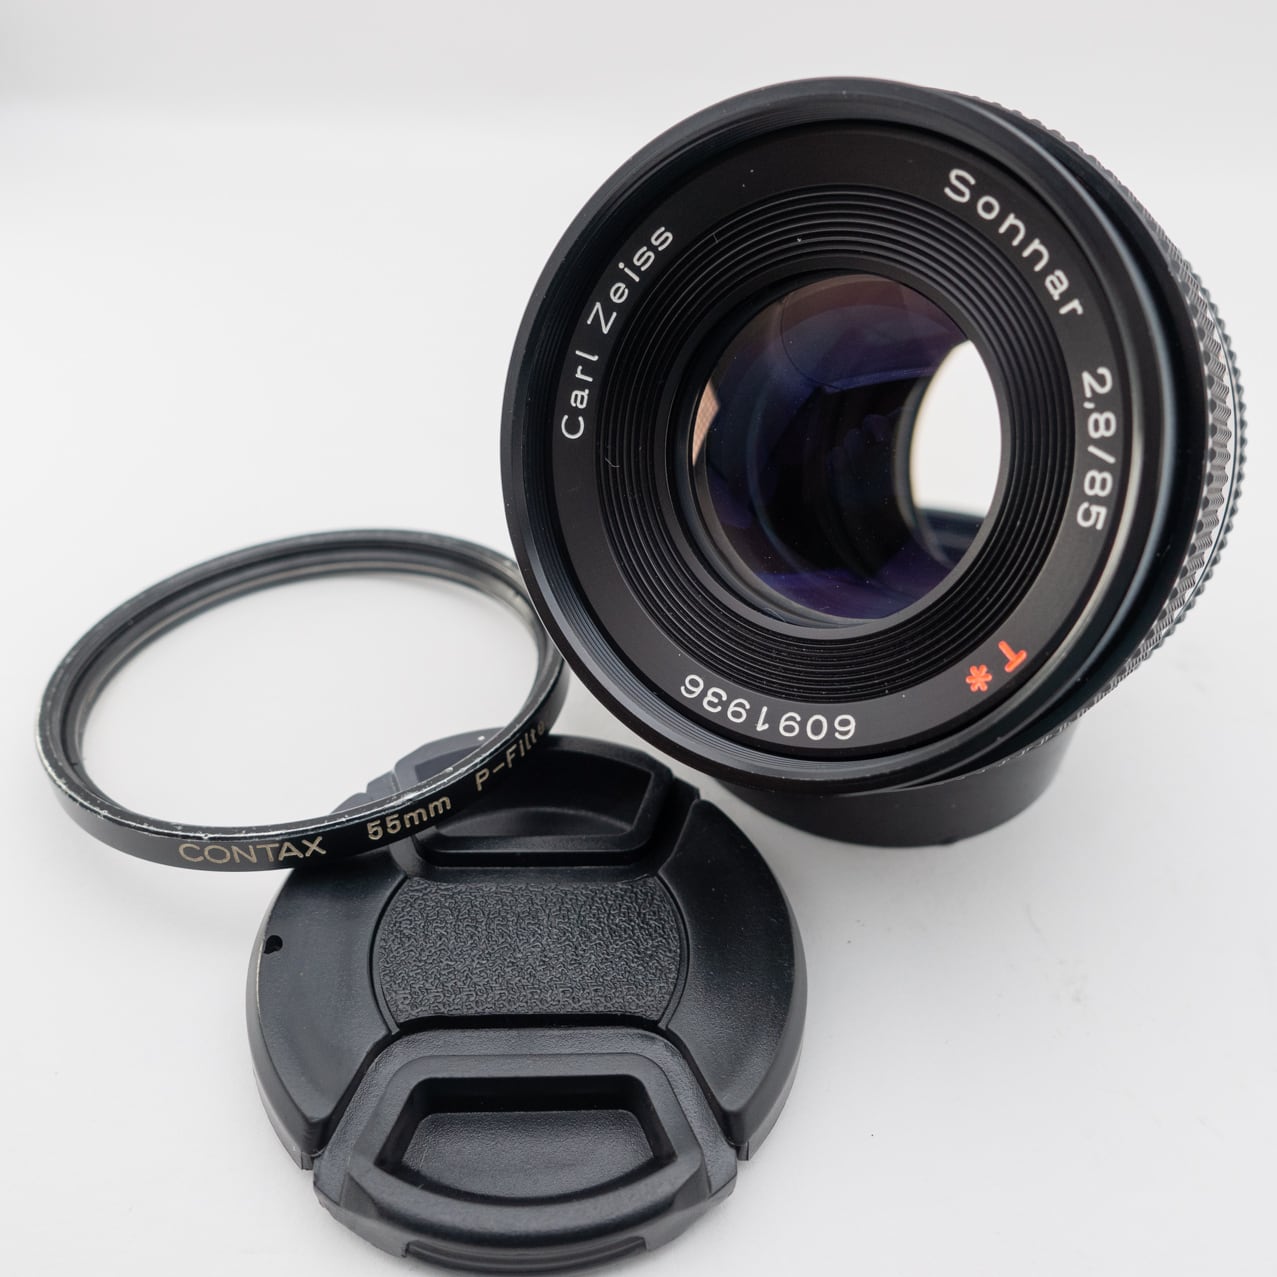 CONTAX Carl Zeiss Sonnar 85mm f/2.8 T* AEG C/Y Mount Lens from JAPAN #0123  | JJ-RISE powered by BASE